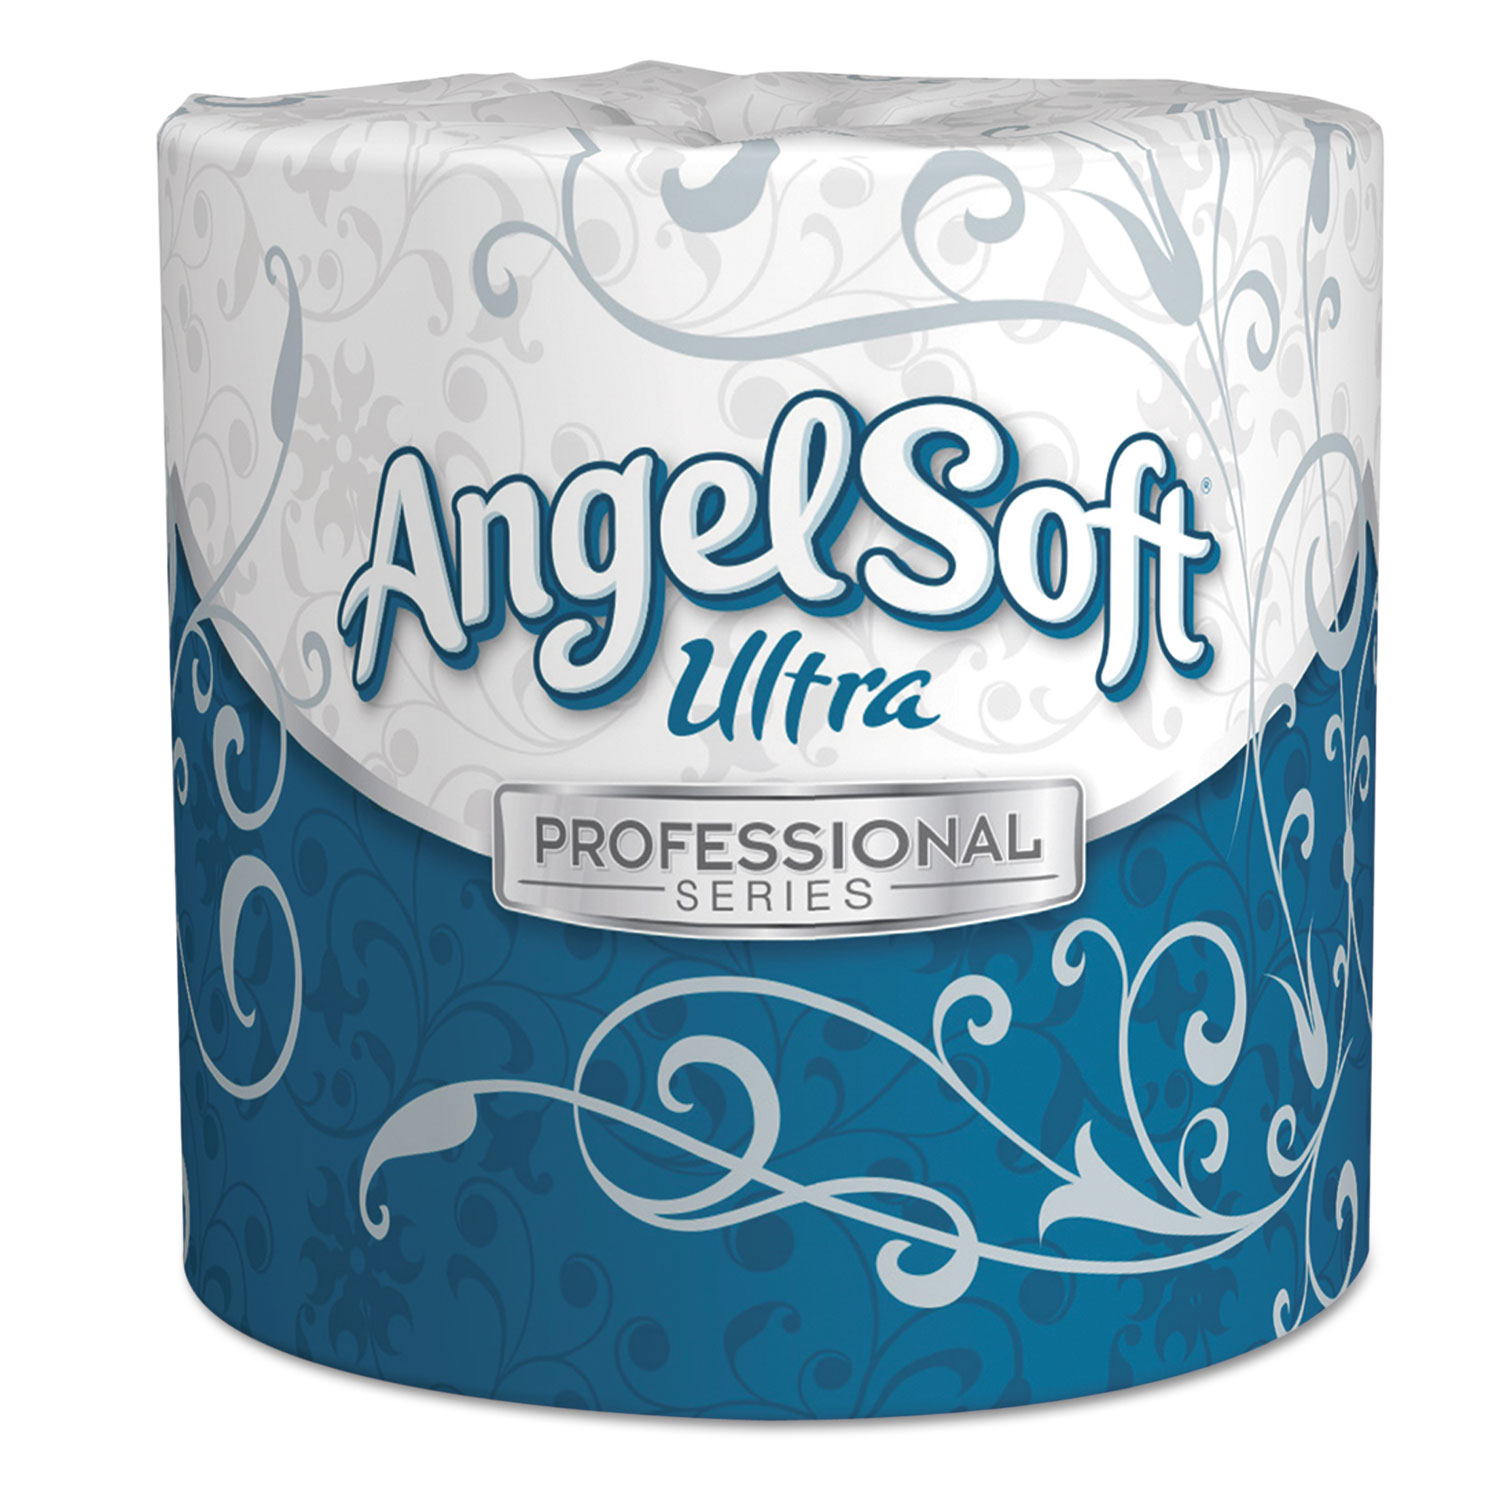  Georgia Pacific Professional 16560 Angel Soft ps Ultra 2-Ply Premium Bathroom Tissue, Septic Safe, White, 400 Sheets Roll, 60/Carton (GPC16560) 